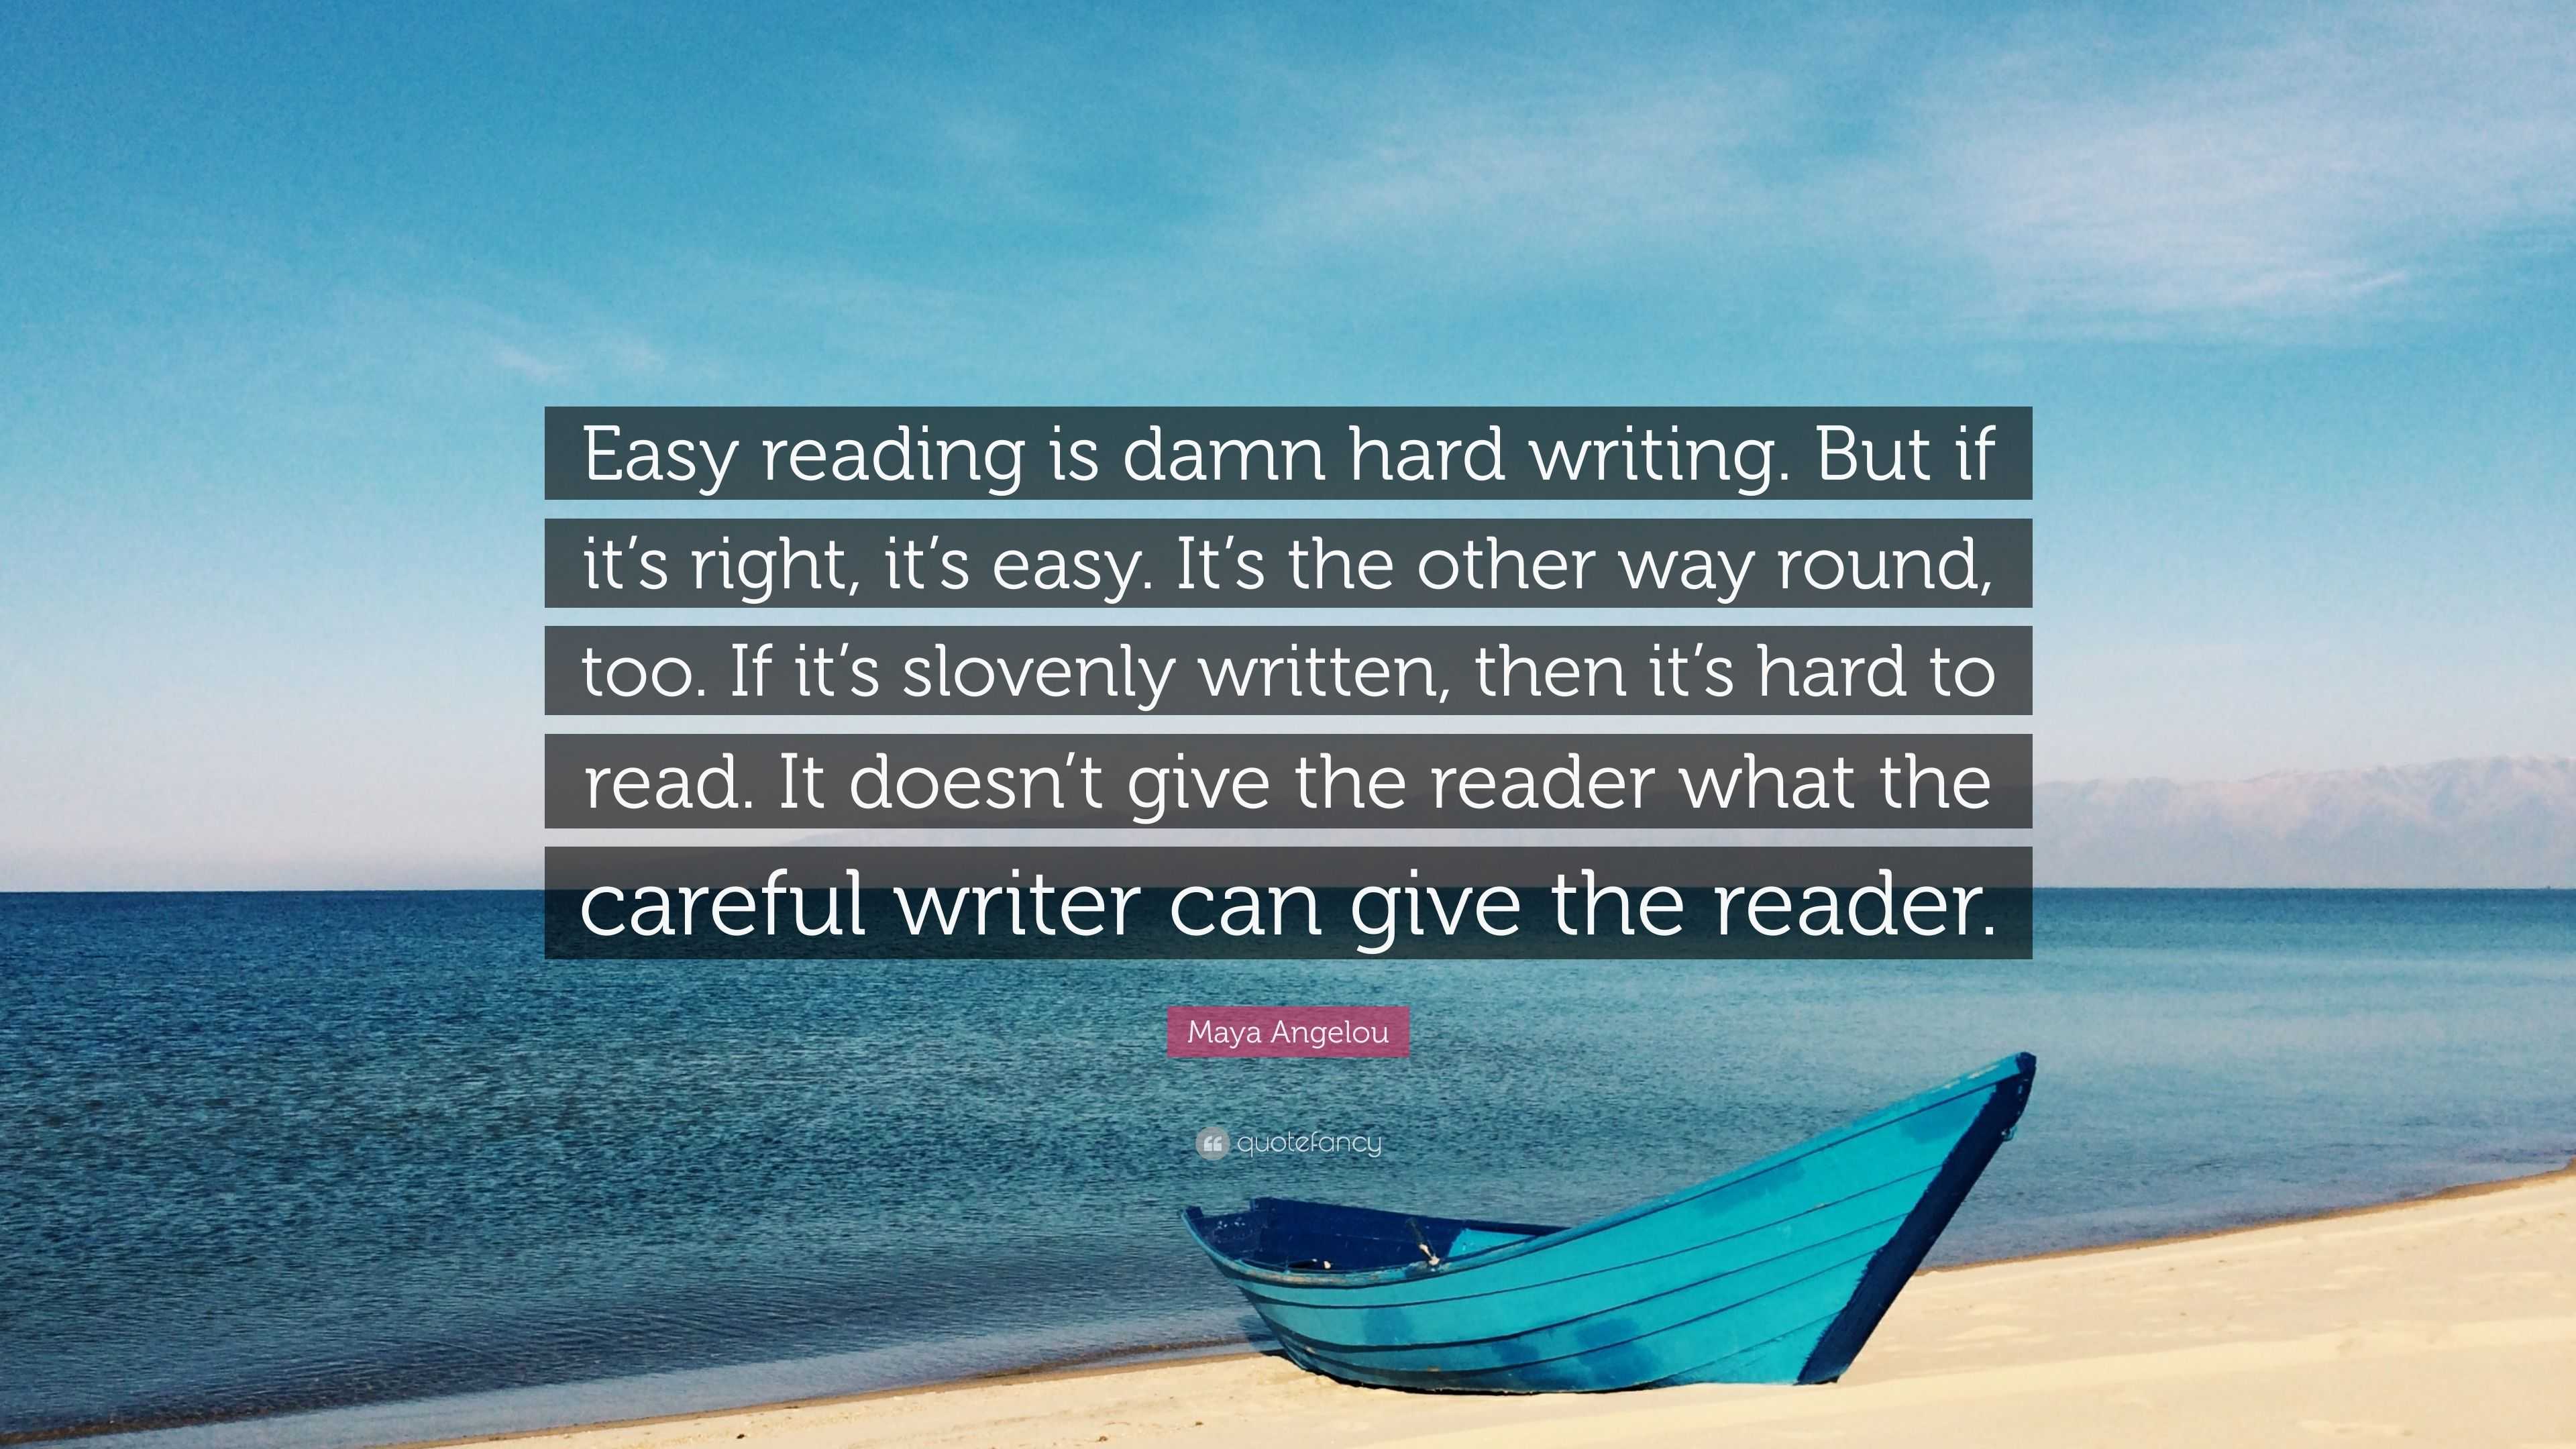 easy reading is damn hard writing meaning